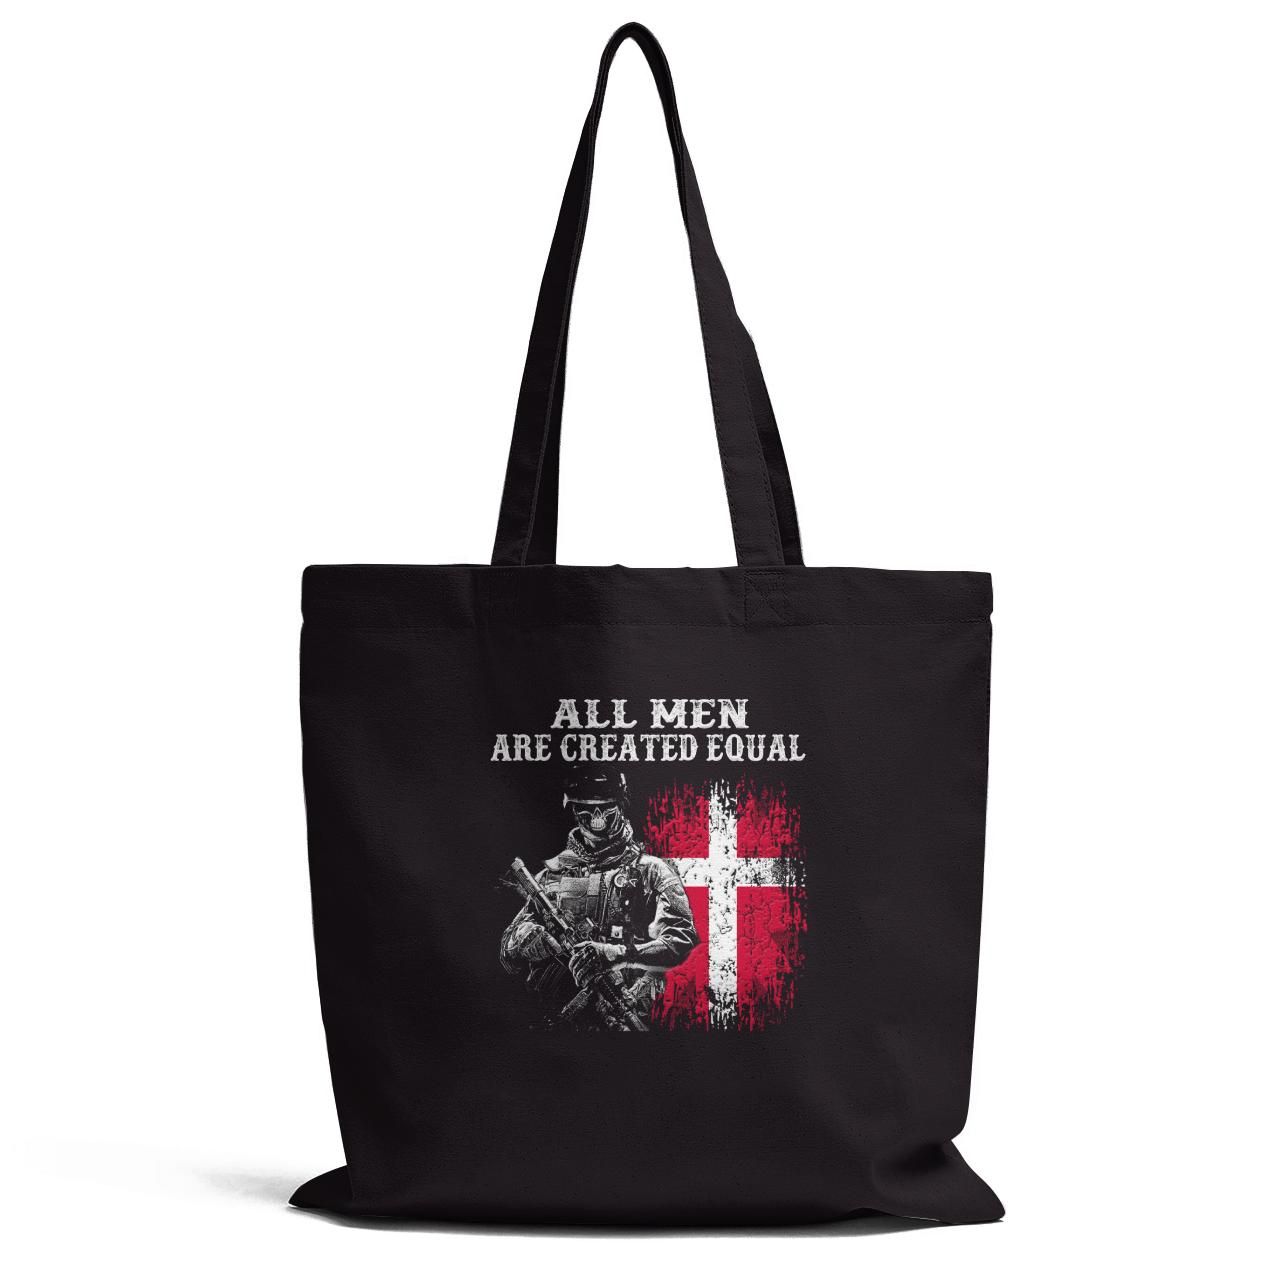 All Men Are Created Equal Tote Bag